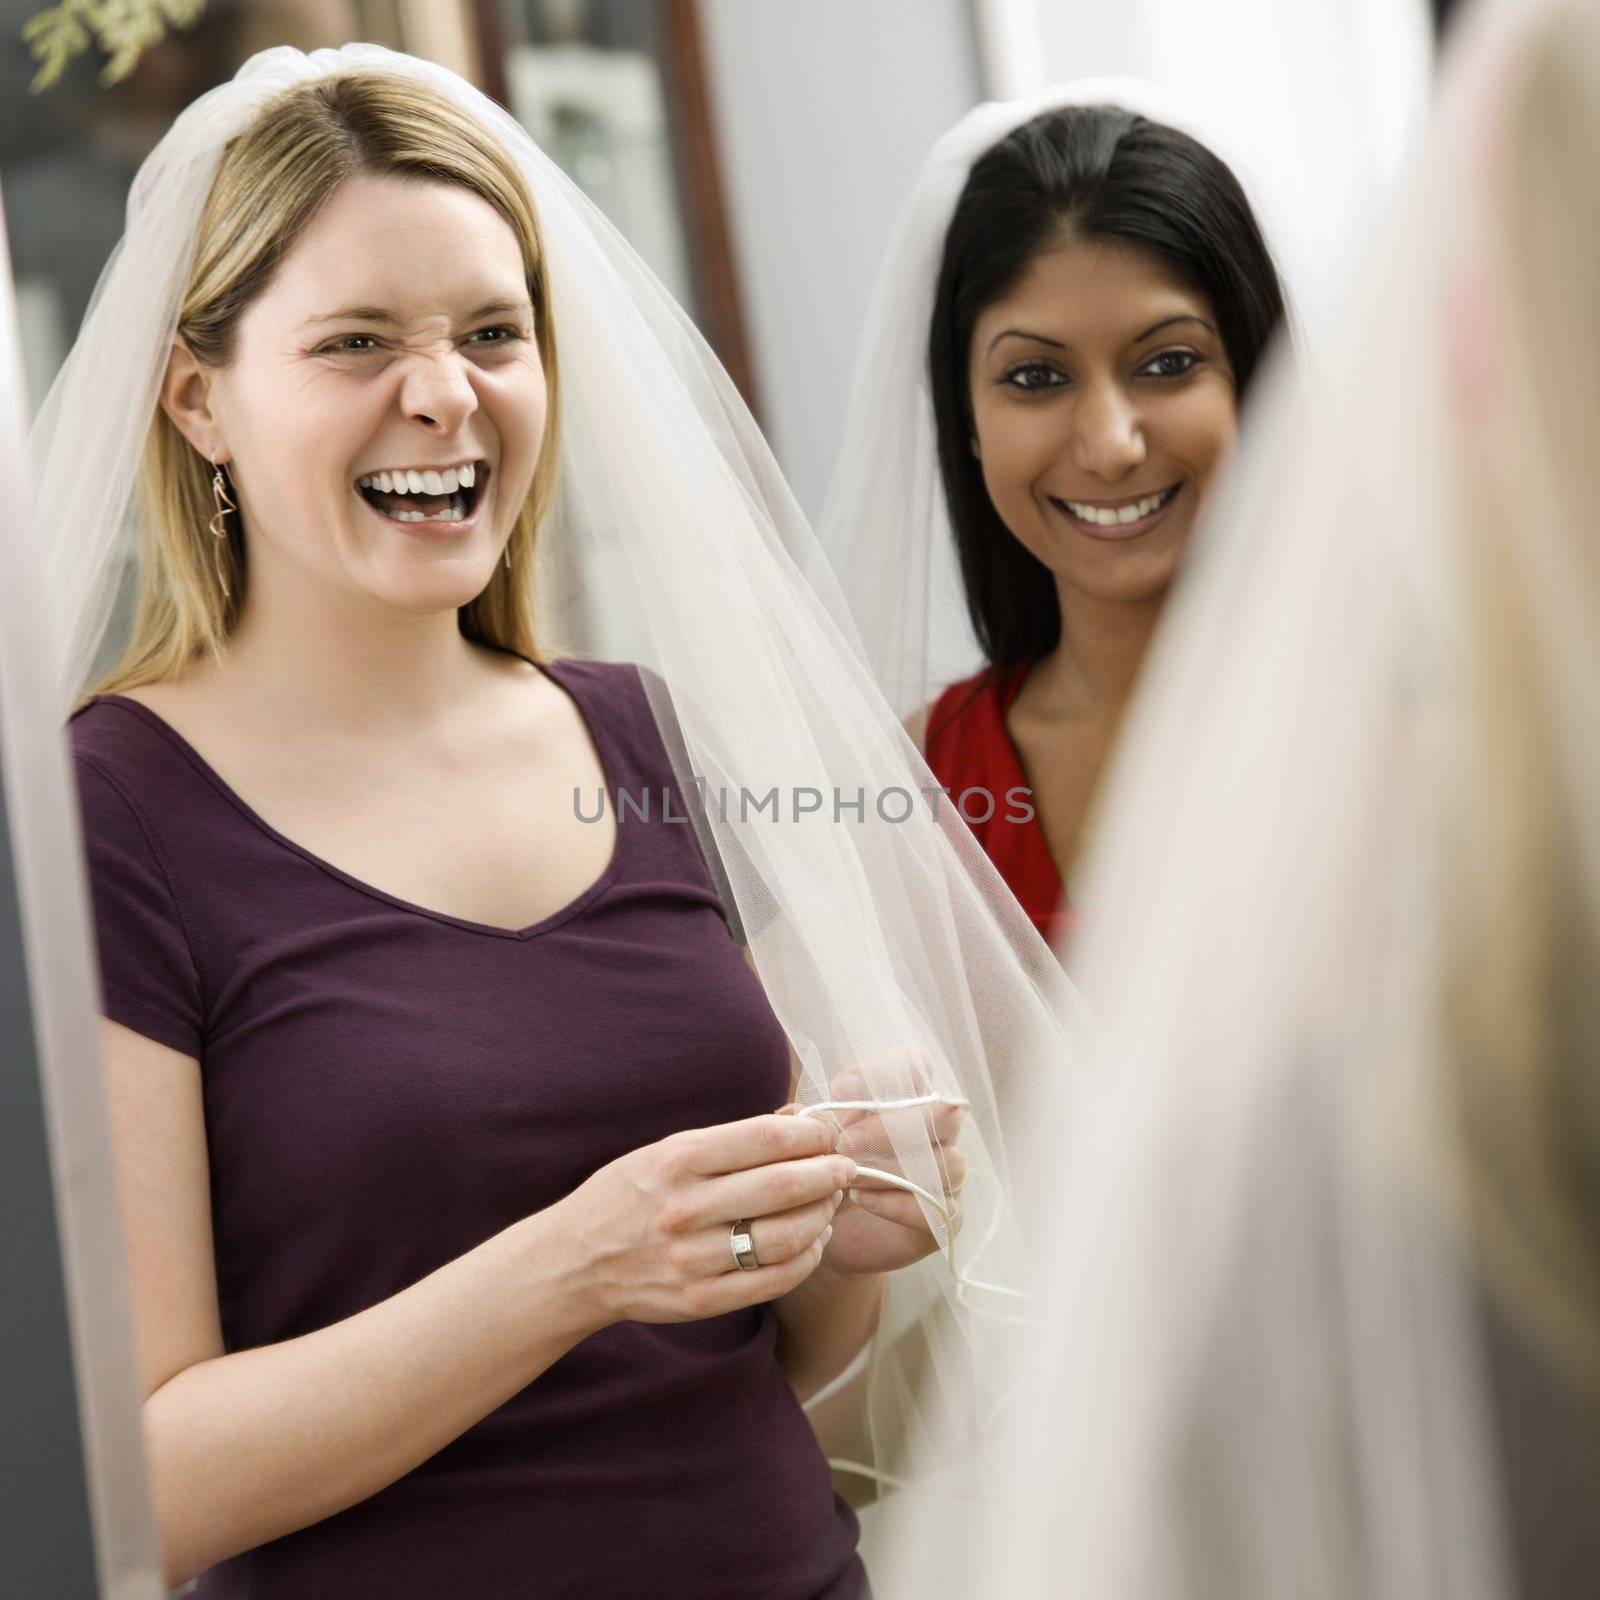 Indian woman and Caucasian woman trying on veils and looking in mirror.